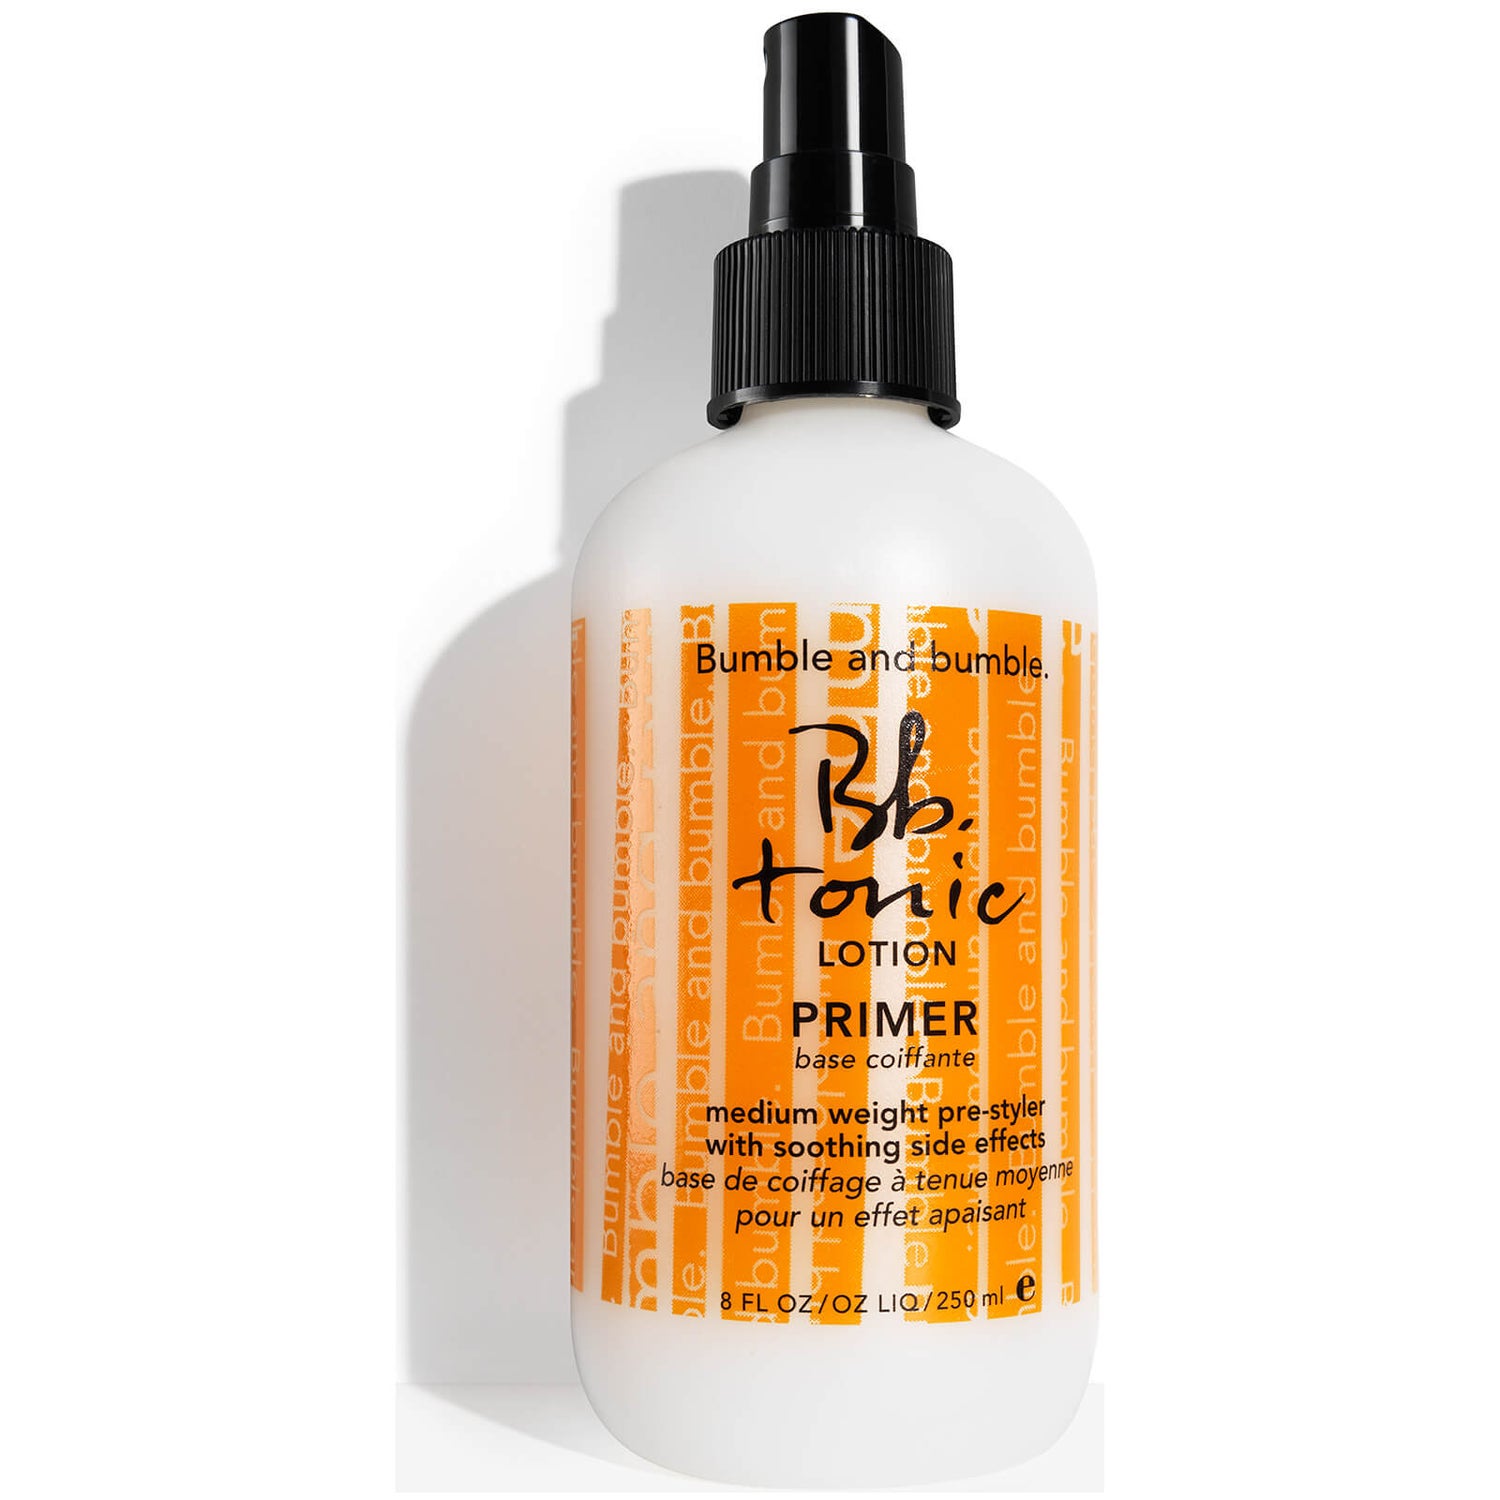 Bumble and bumble Tonic Lotion 250 ml